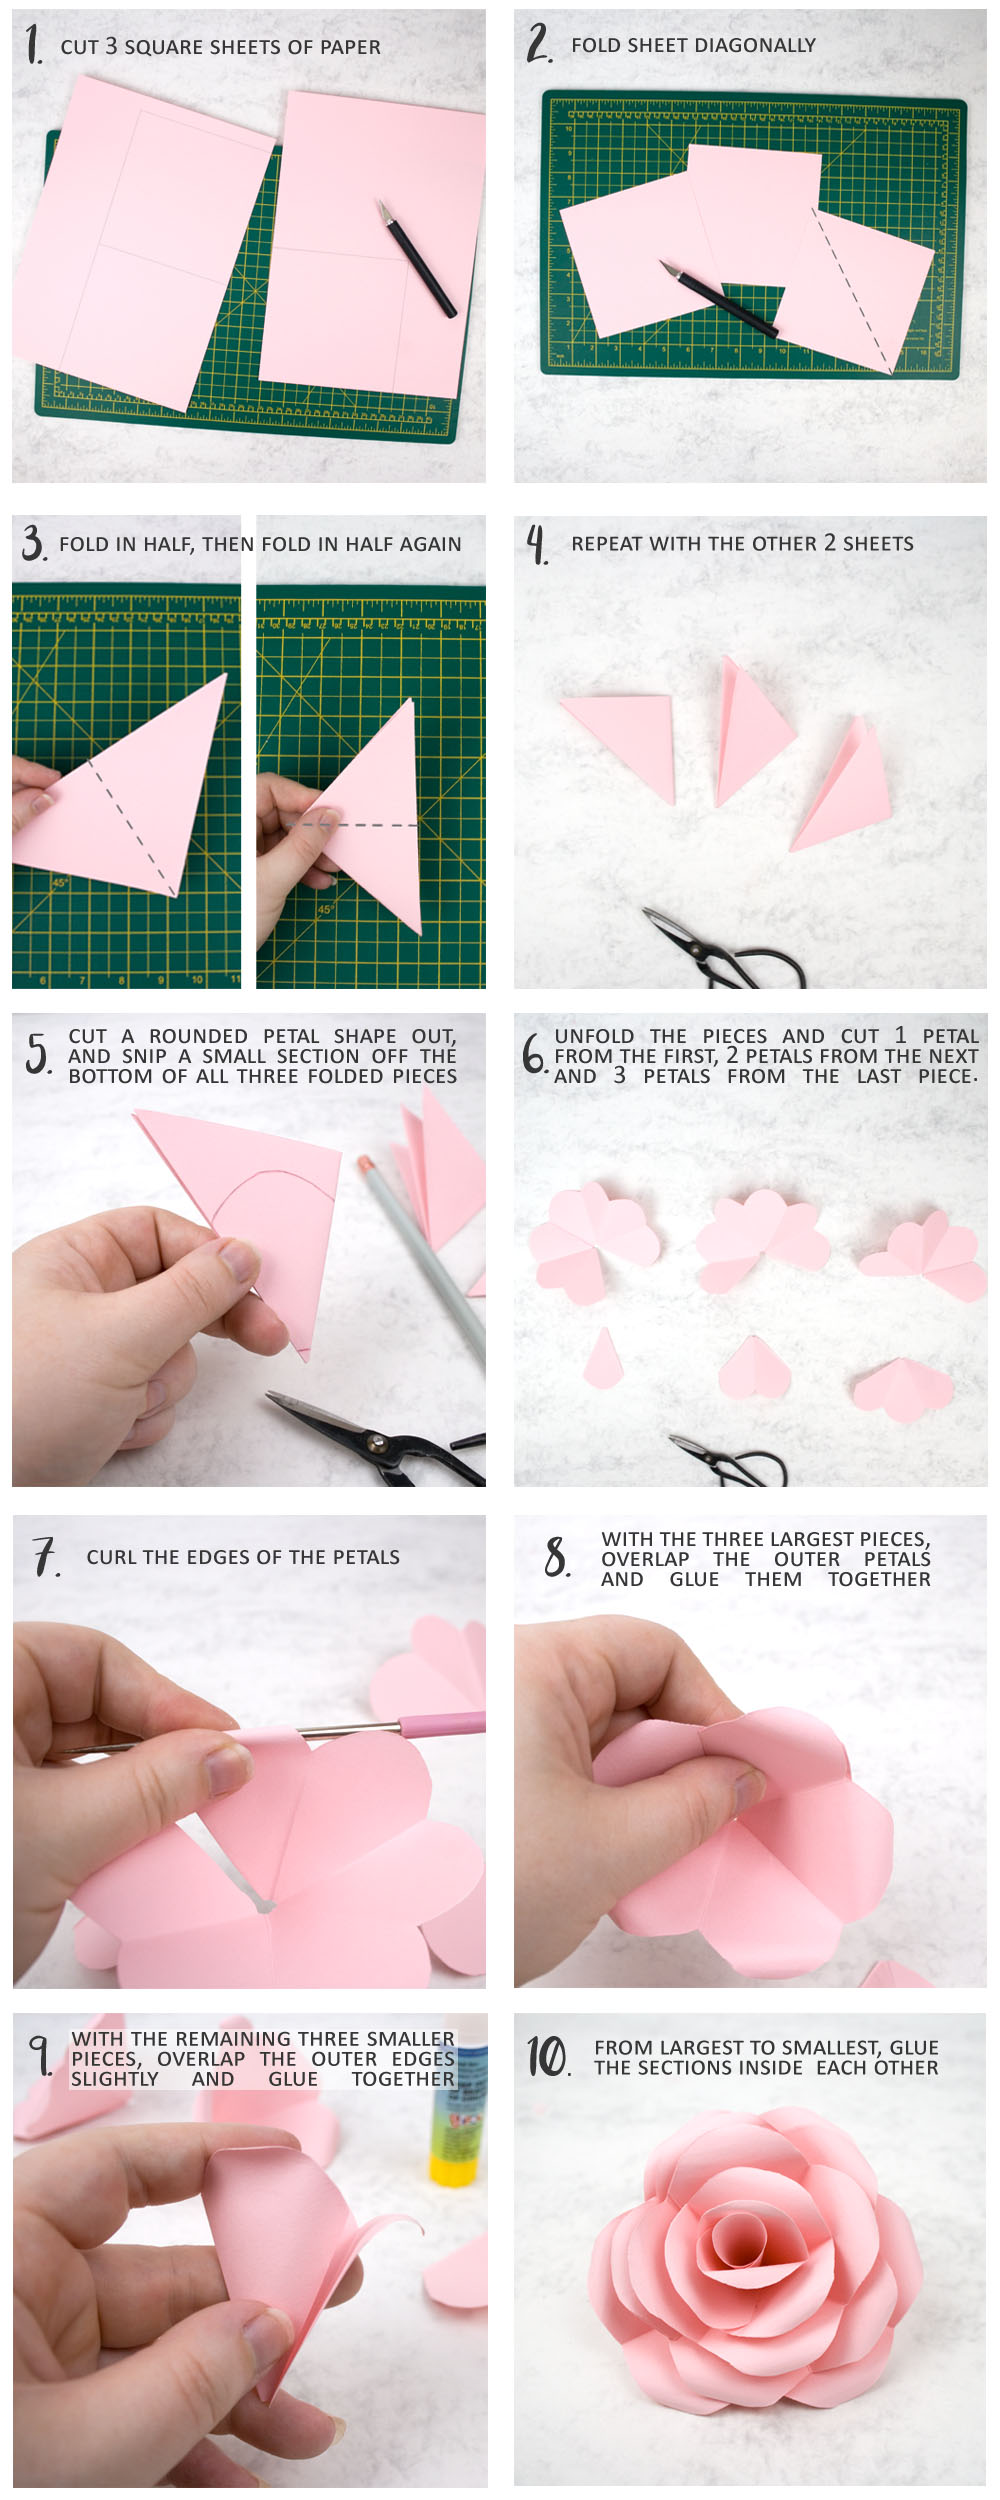 how to make paper roses step by step for kids